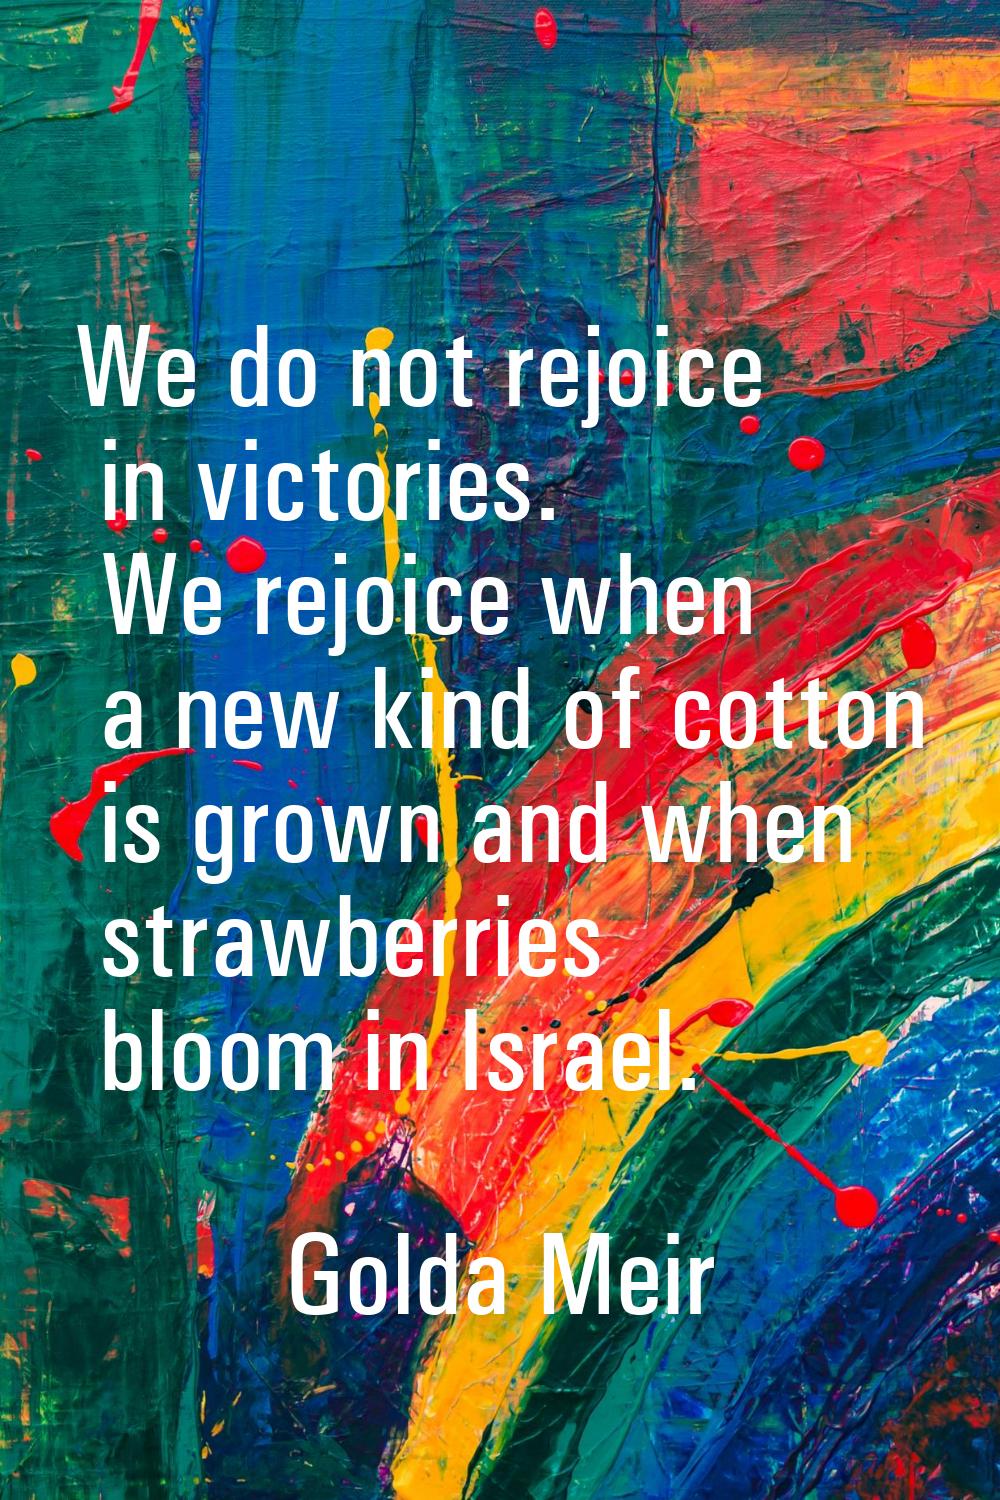 We do not rejoice in victories. We rejoice when a new kind of cotton is grown and when strawberries